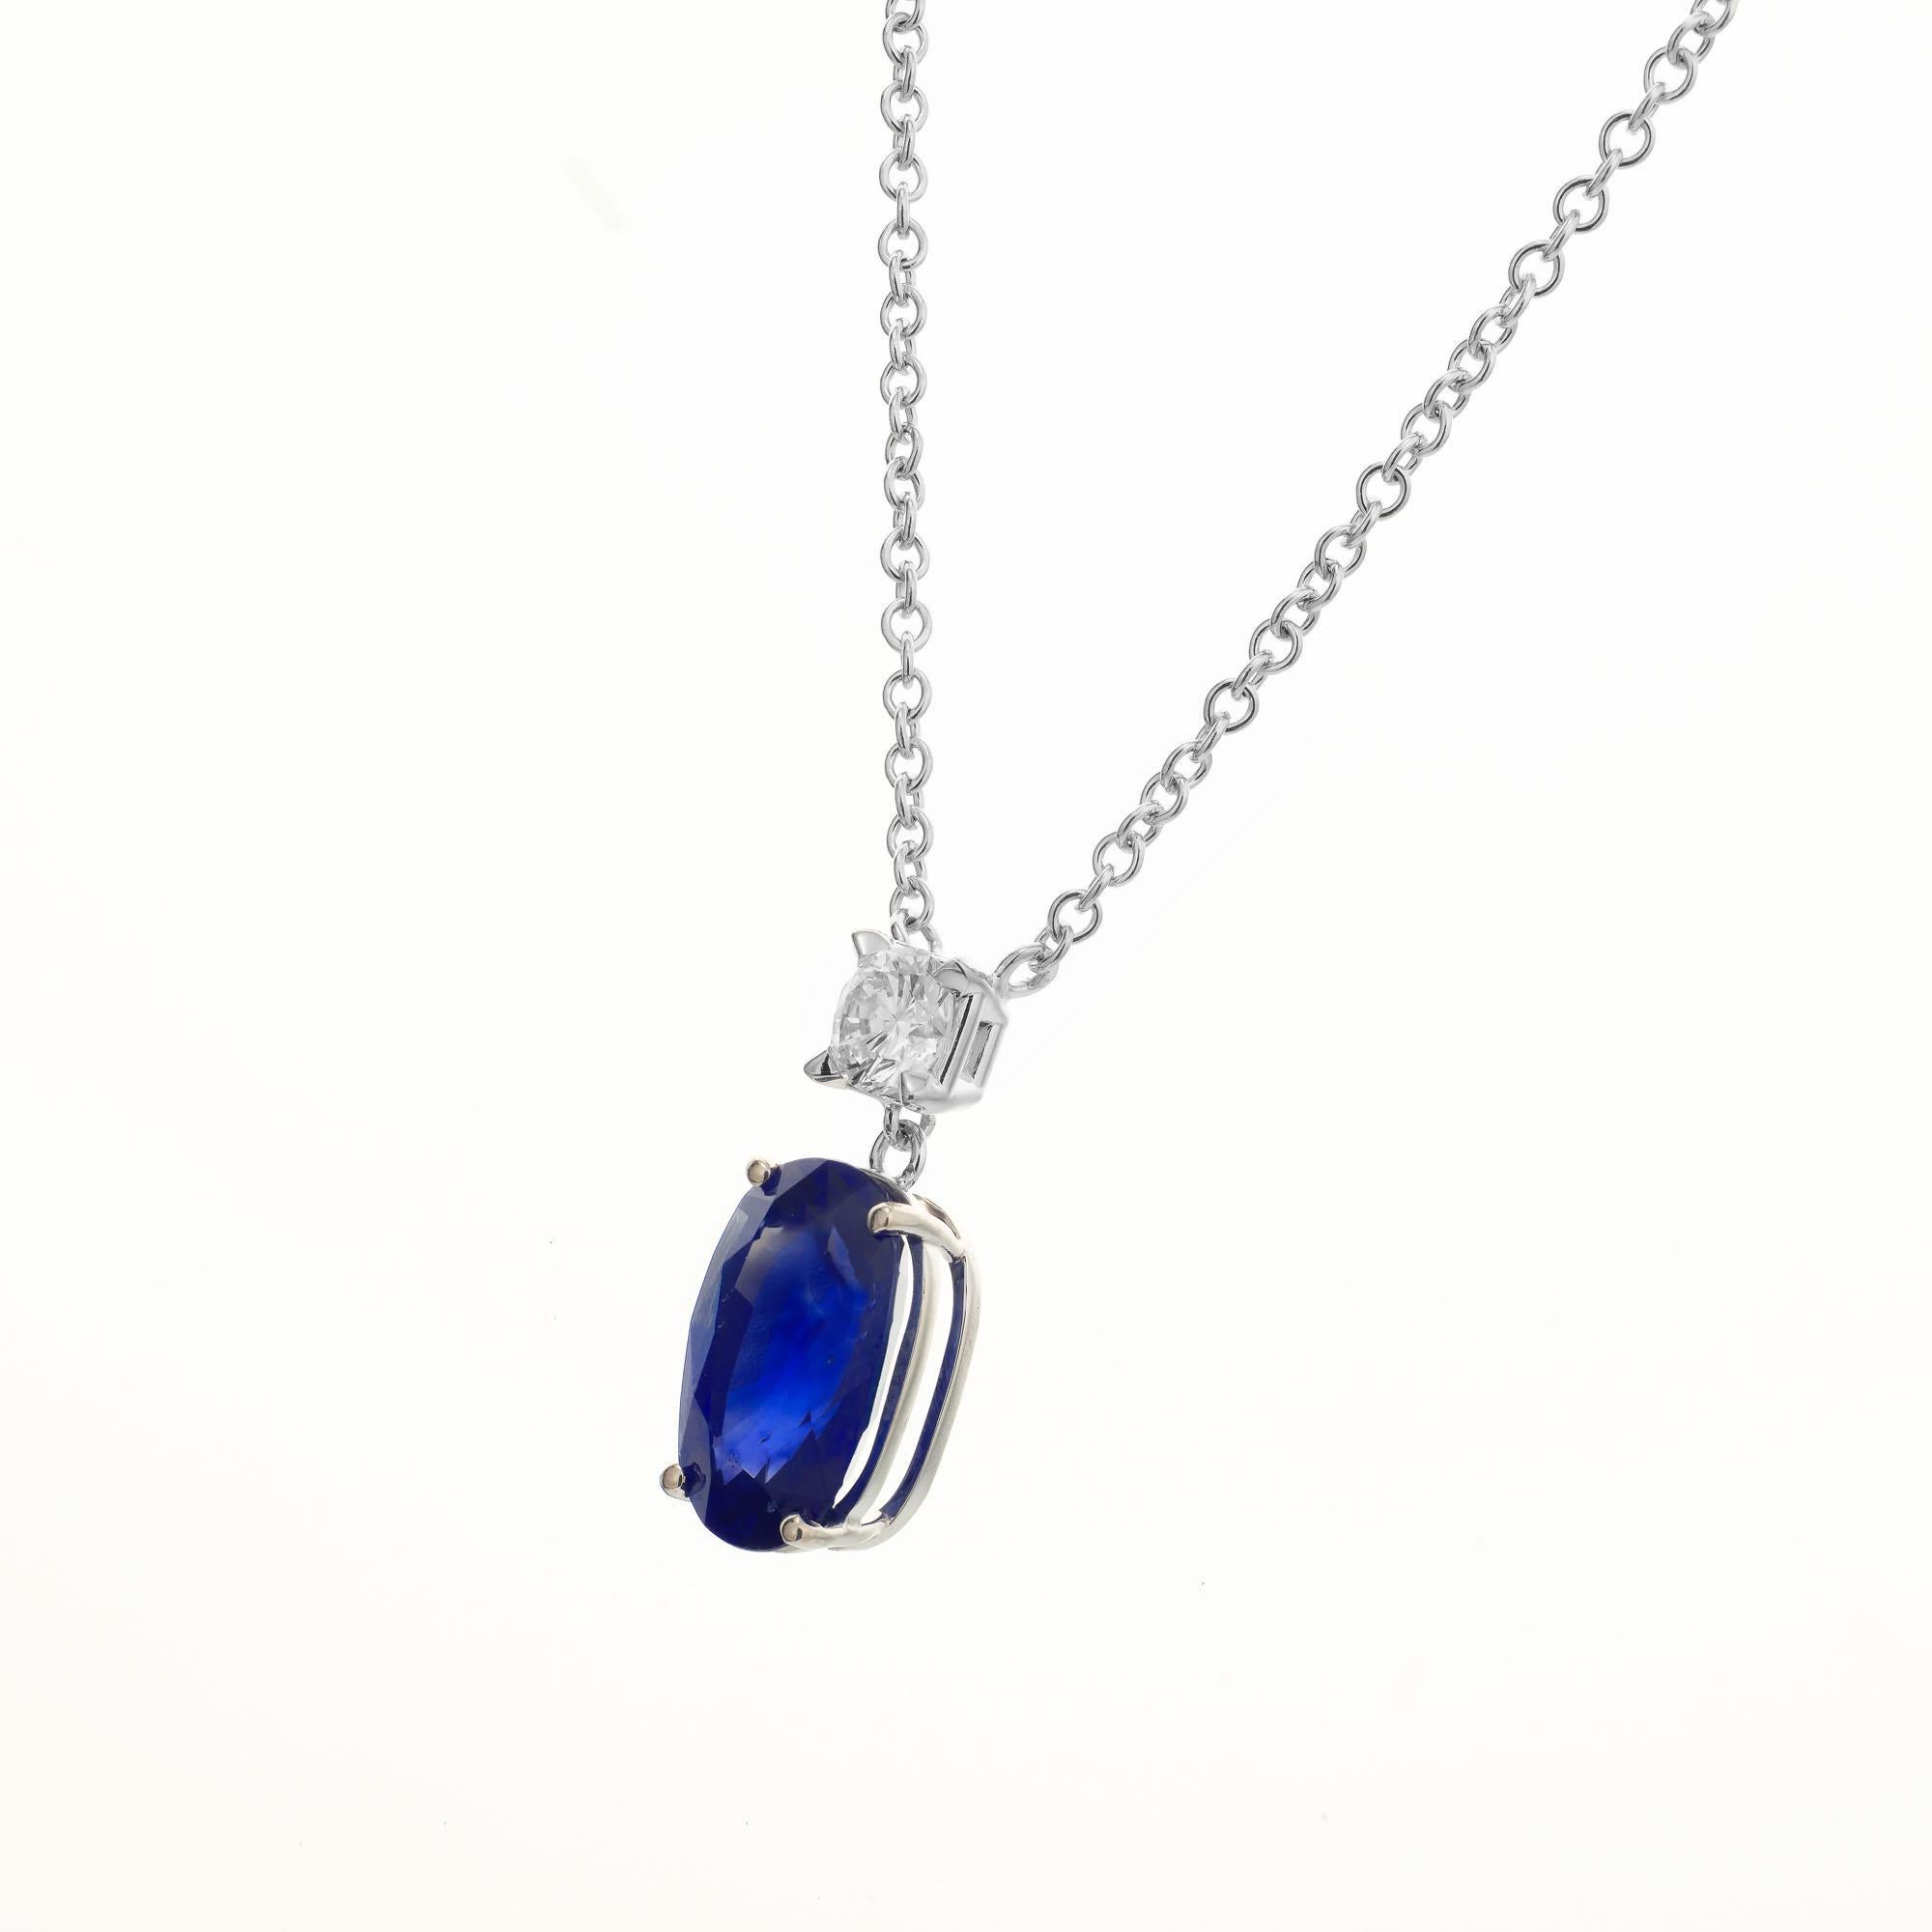 Oval sapphire and diamond pendant necklace. GIA certified 3.82 carat oval sapphire, natural with simple heat only. Fine blue with some natural color zoning towards the top of the stone accented with a round brilliant cut diamond set in 18k white